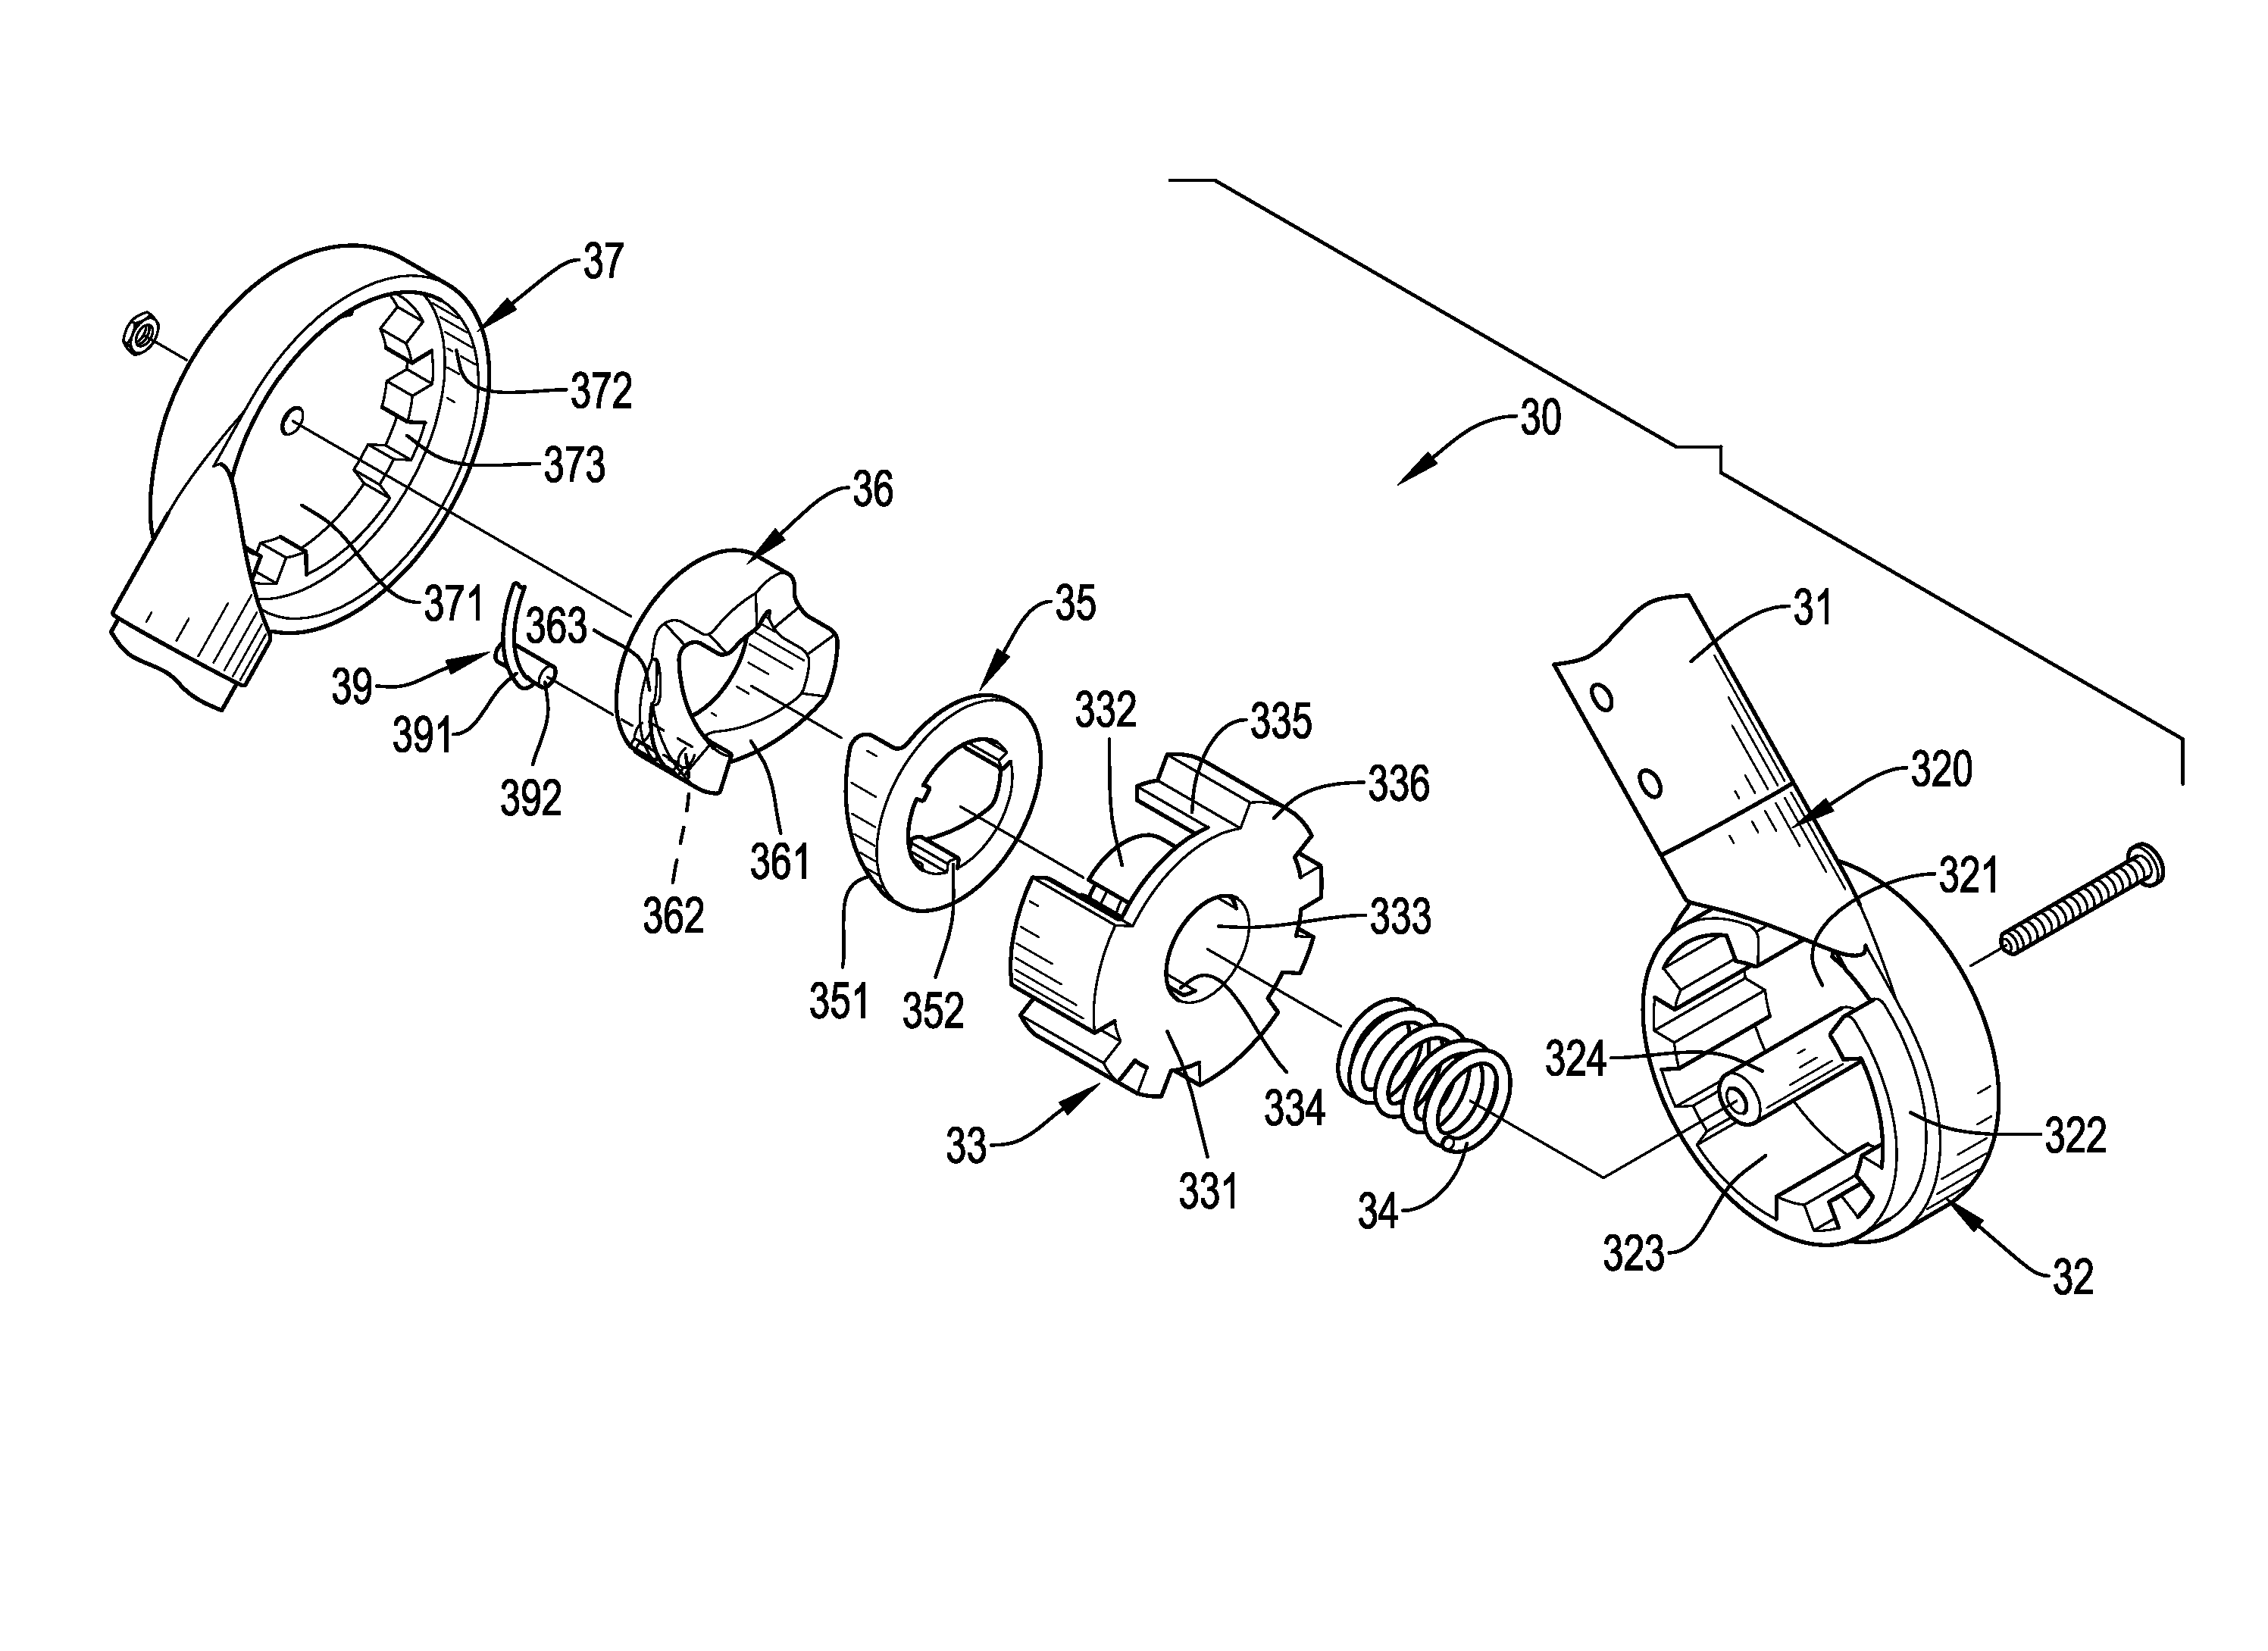 Folding device for baby carriage